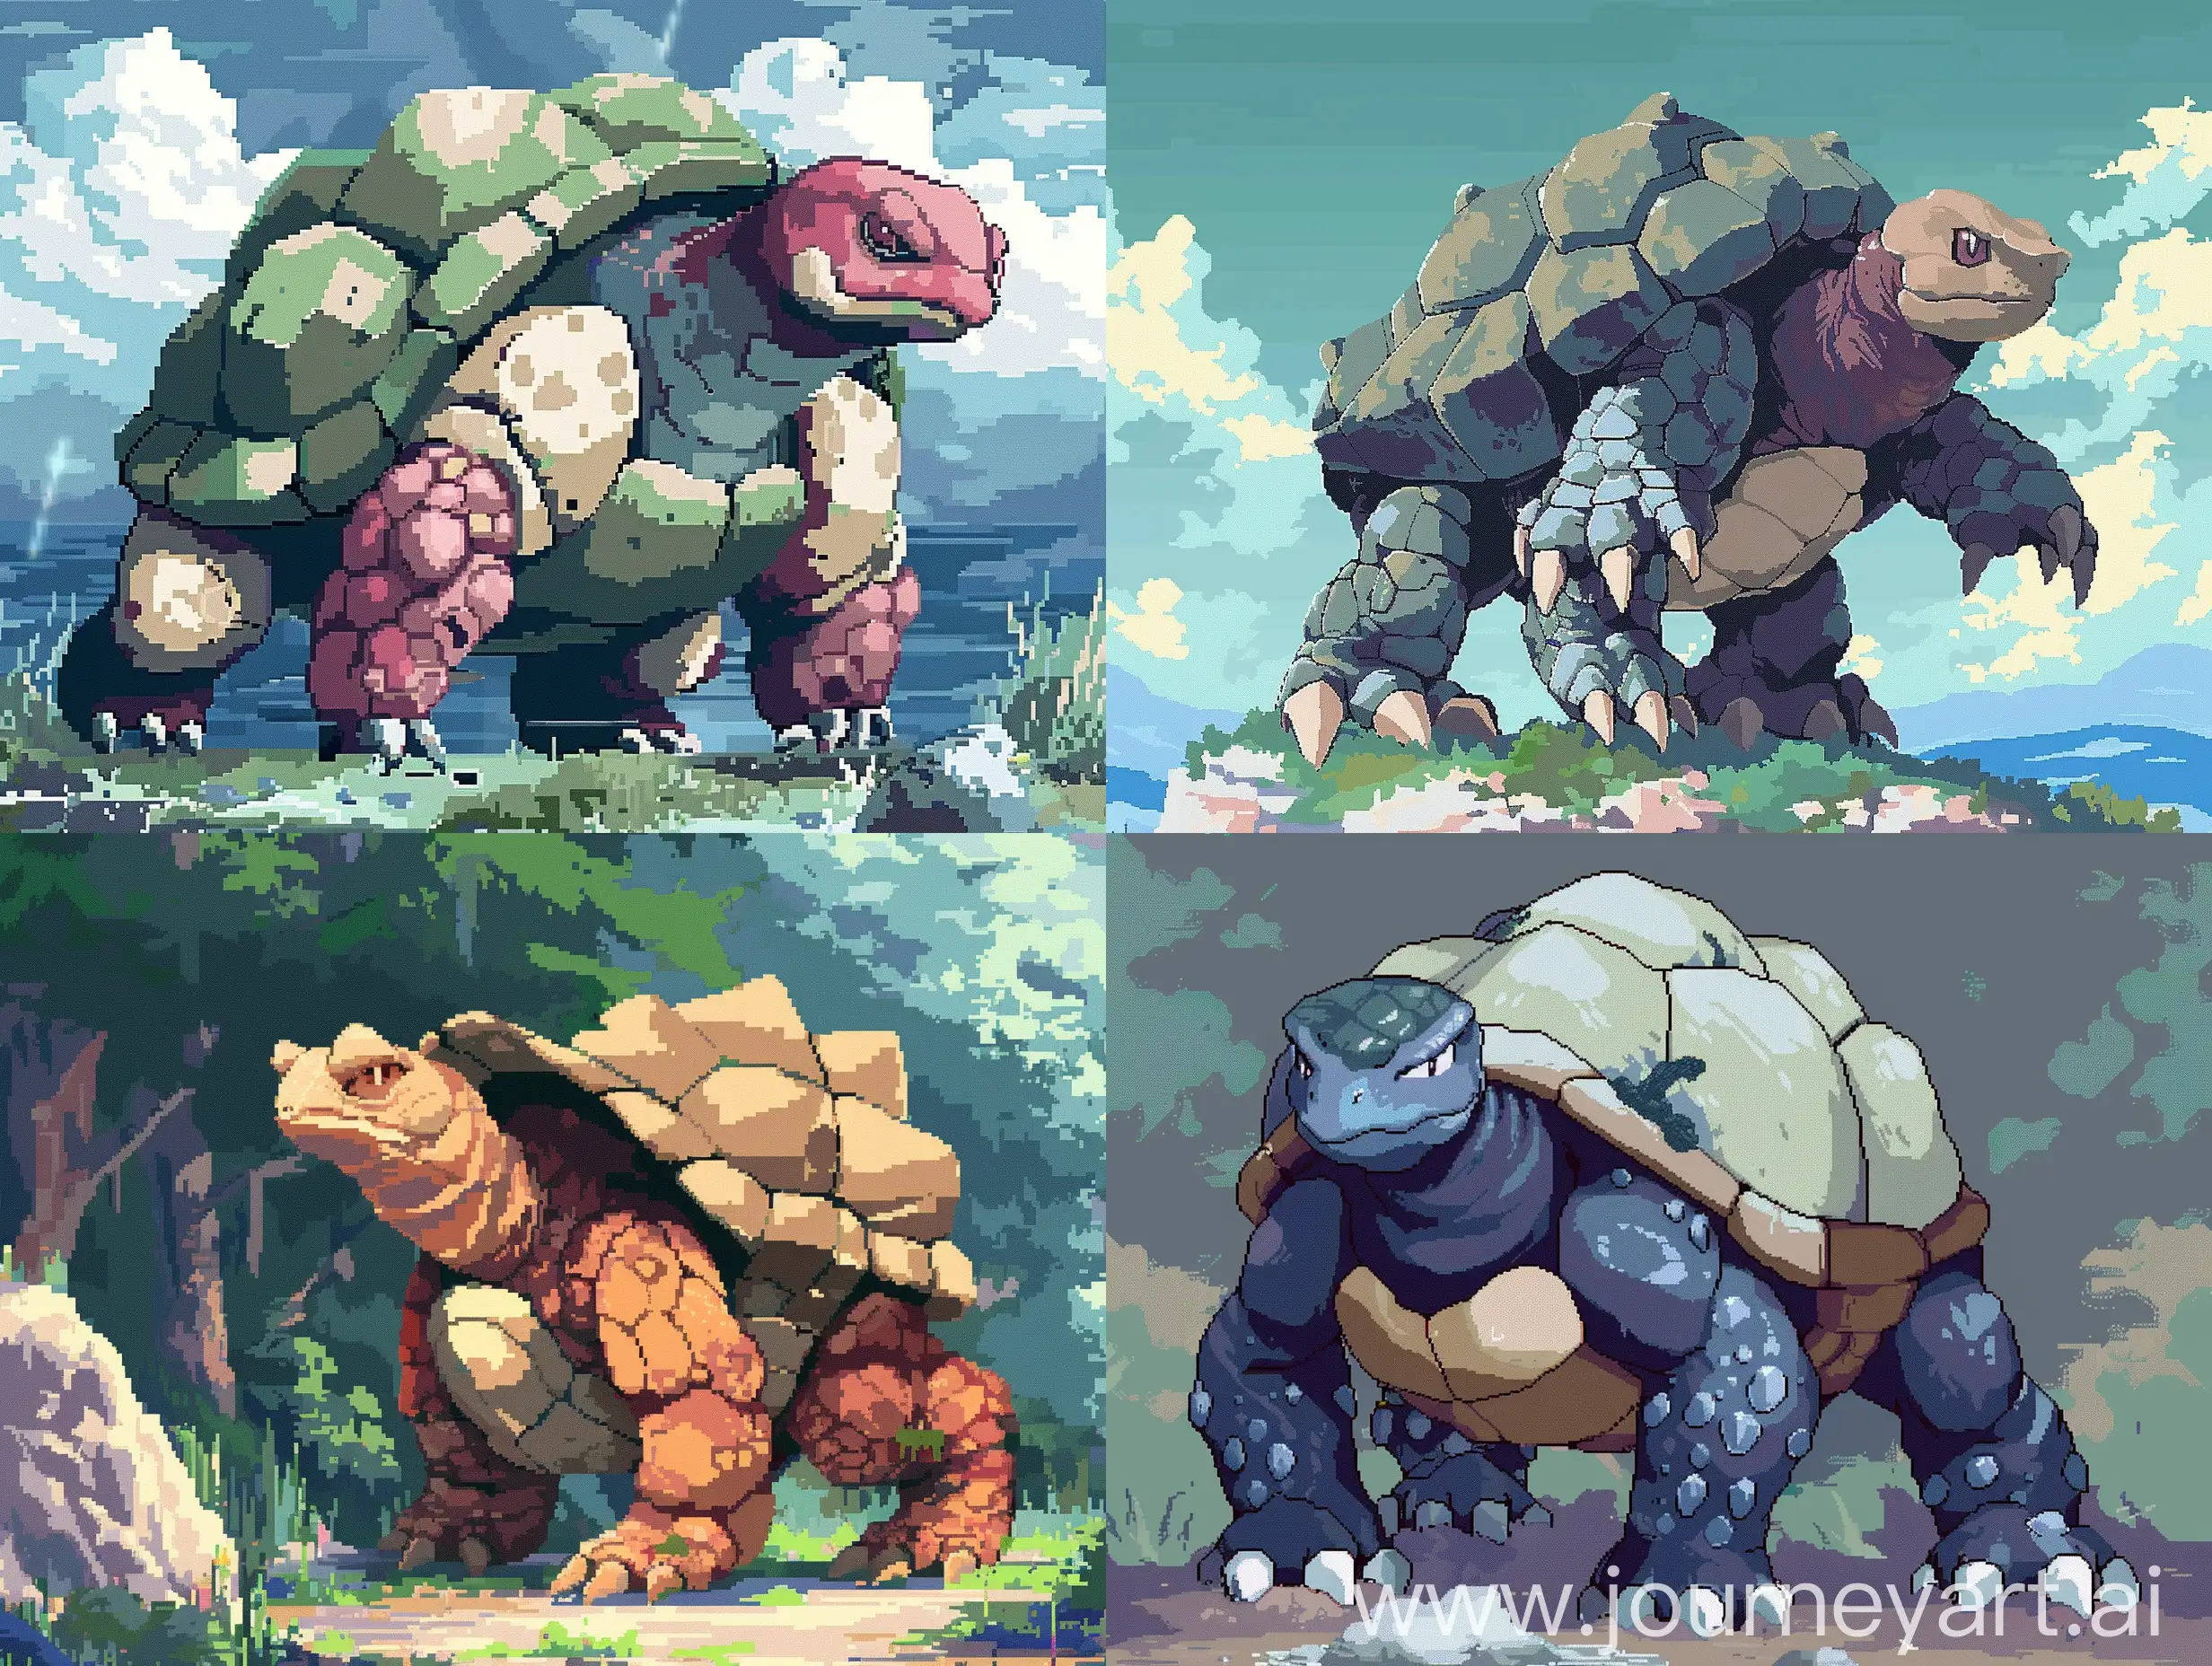  Pokemon who looks like giant tortoise that evolved from tiny toad that evolved from fish, poison/metal type, pixel art, anime style, minimalistic. 